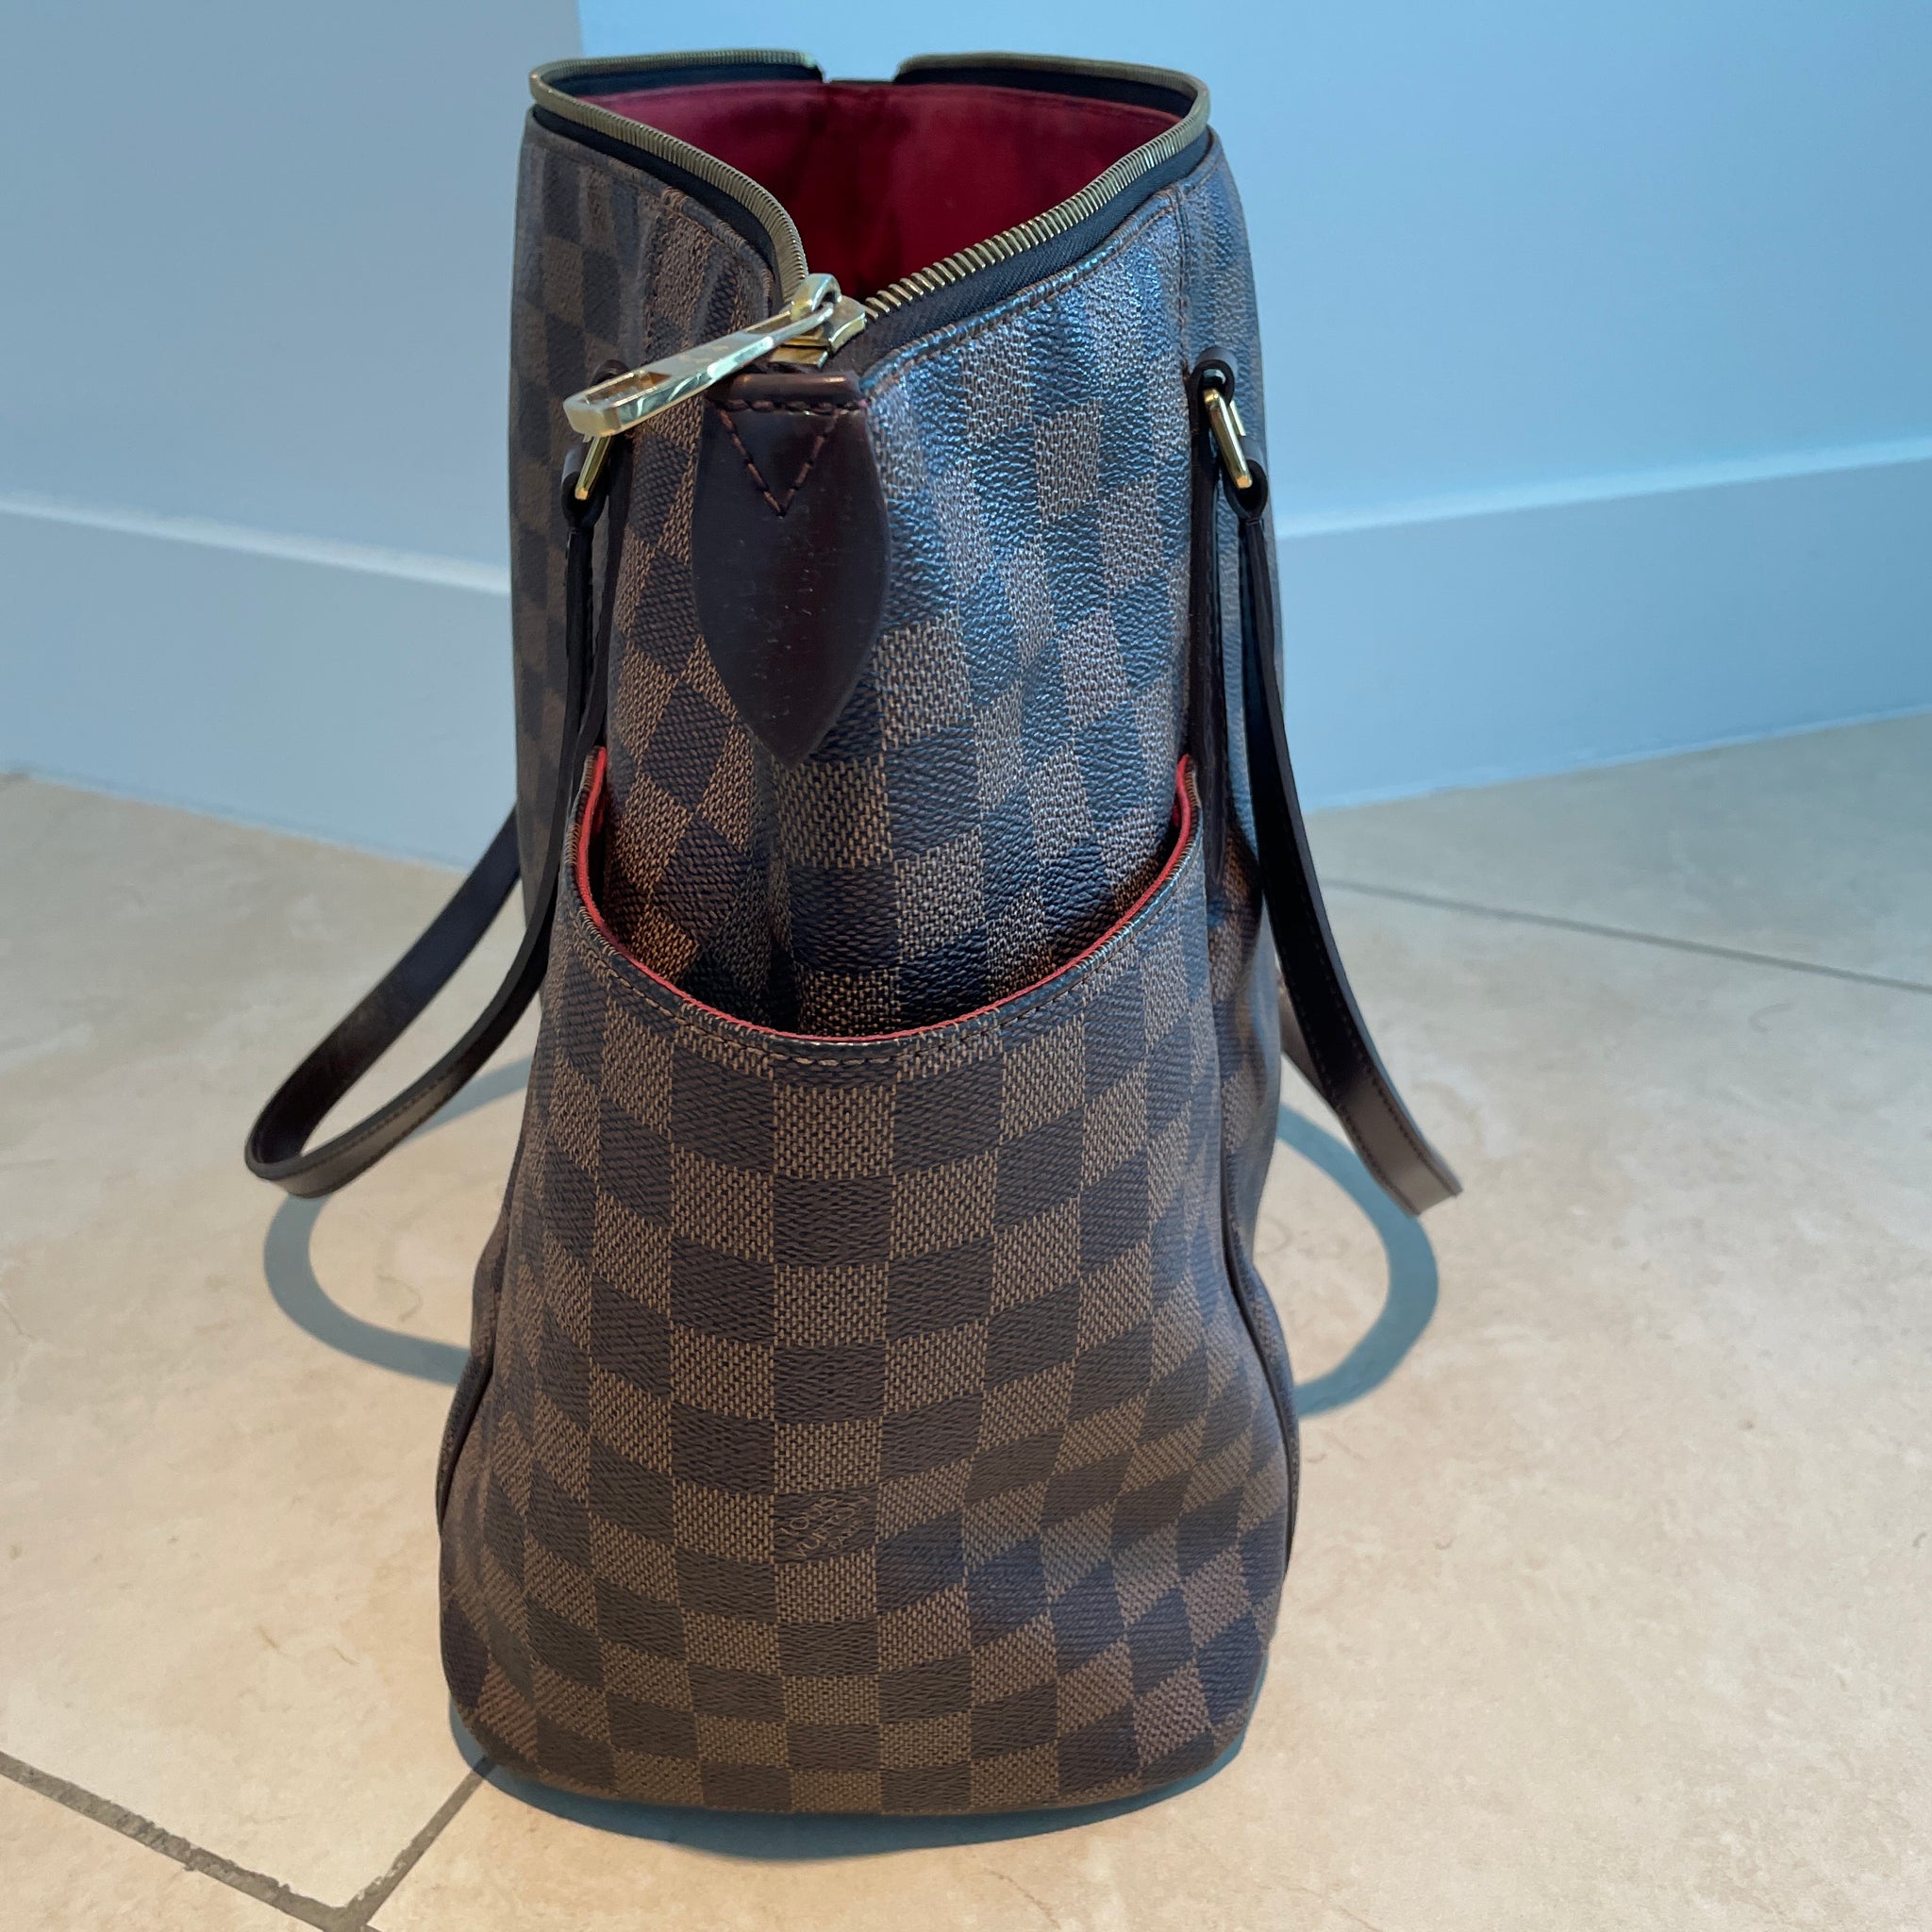 Louis Vuitton Damier Ebene Totally MM - A World Of Goods For You, LLC